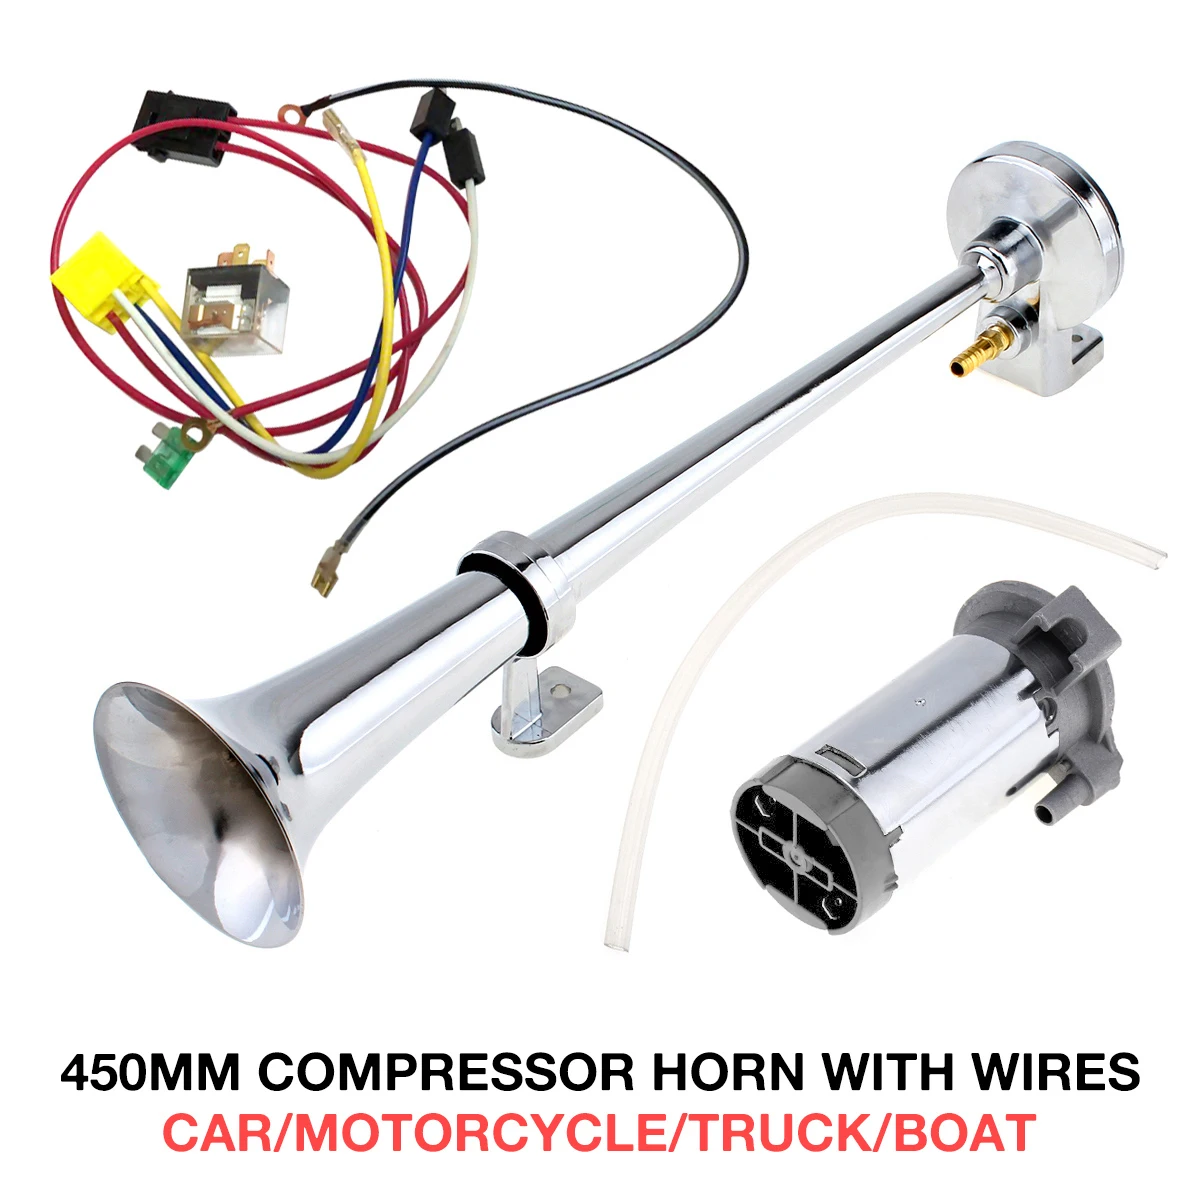 17 Inch 12V/24V 150dB Super Loud Air Horn Compressor Kits Wires and   Relay + Compressor+ Air Horn Single Trumpet Horn for Truck